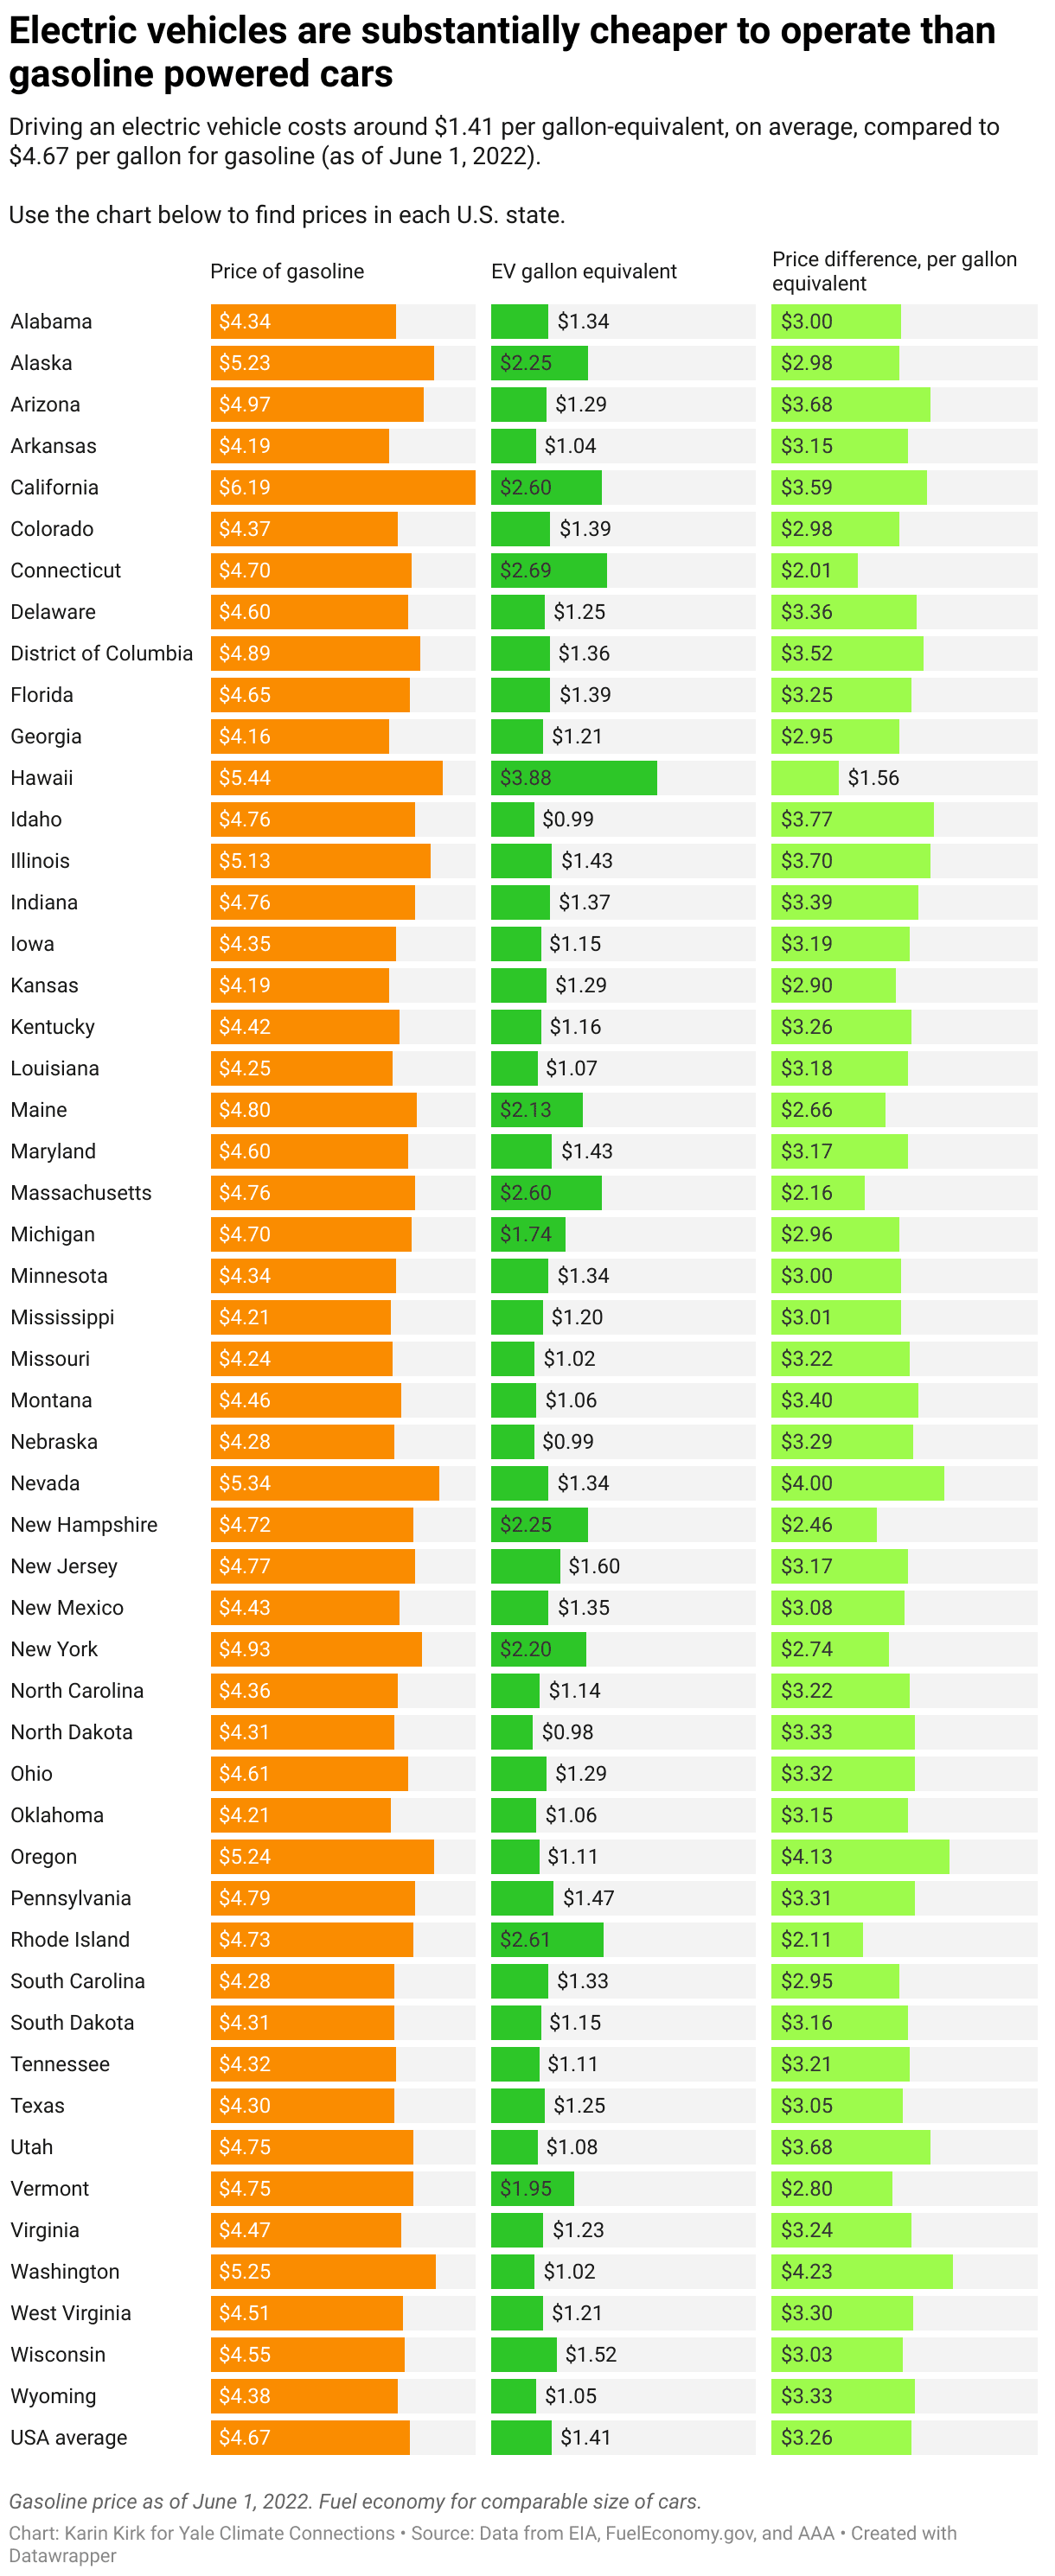 Price of gas and EV equivalent (state by state)